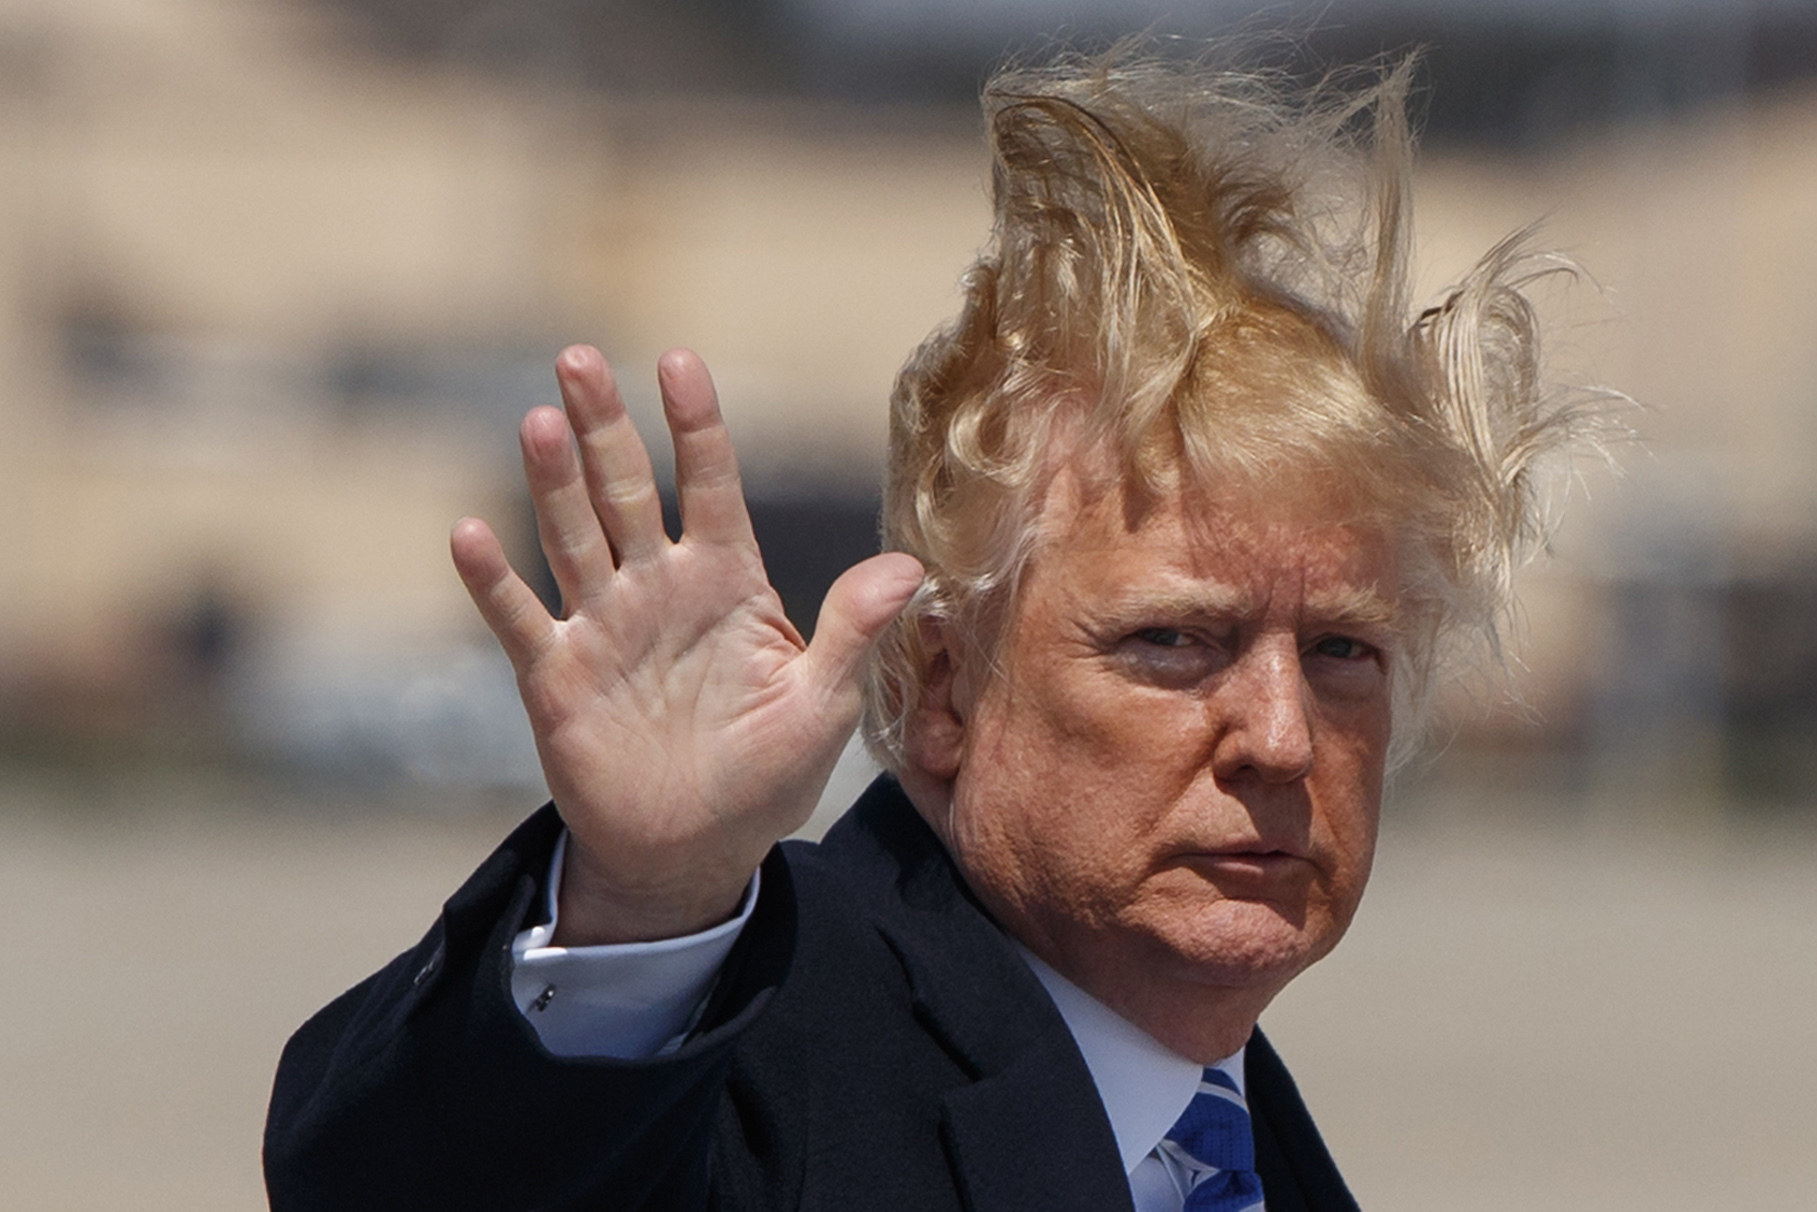 Donald Trump is seen with windswept wild hair as he waves at the cameras